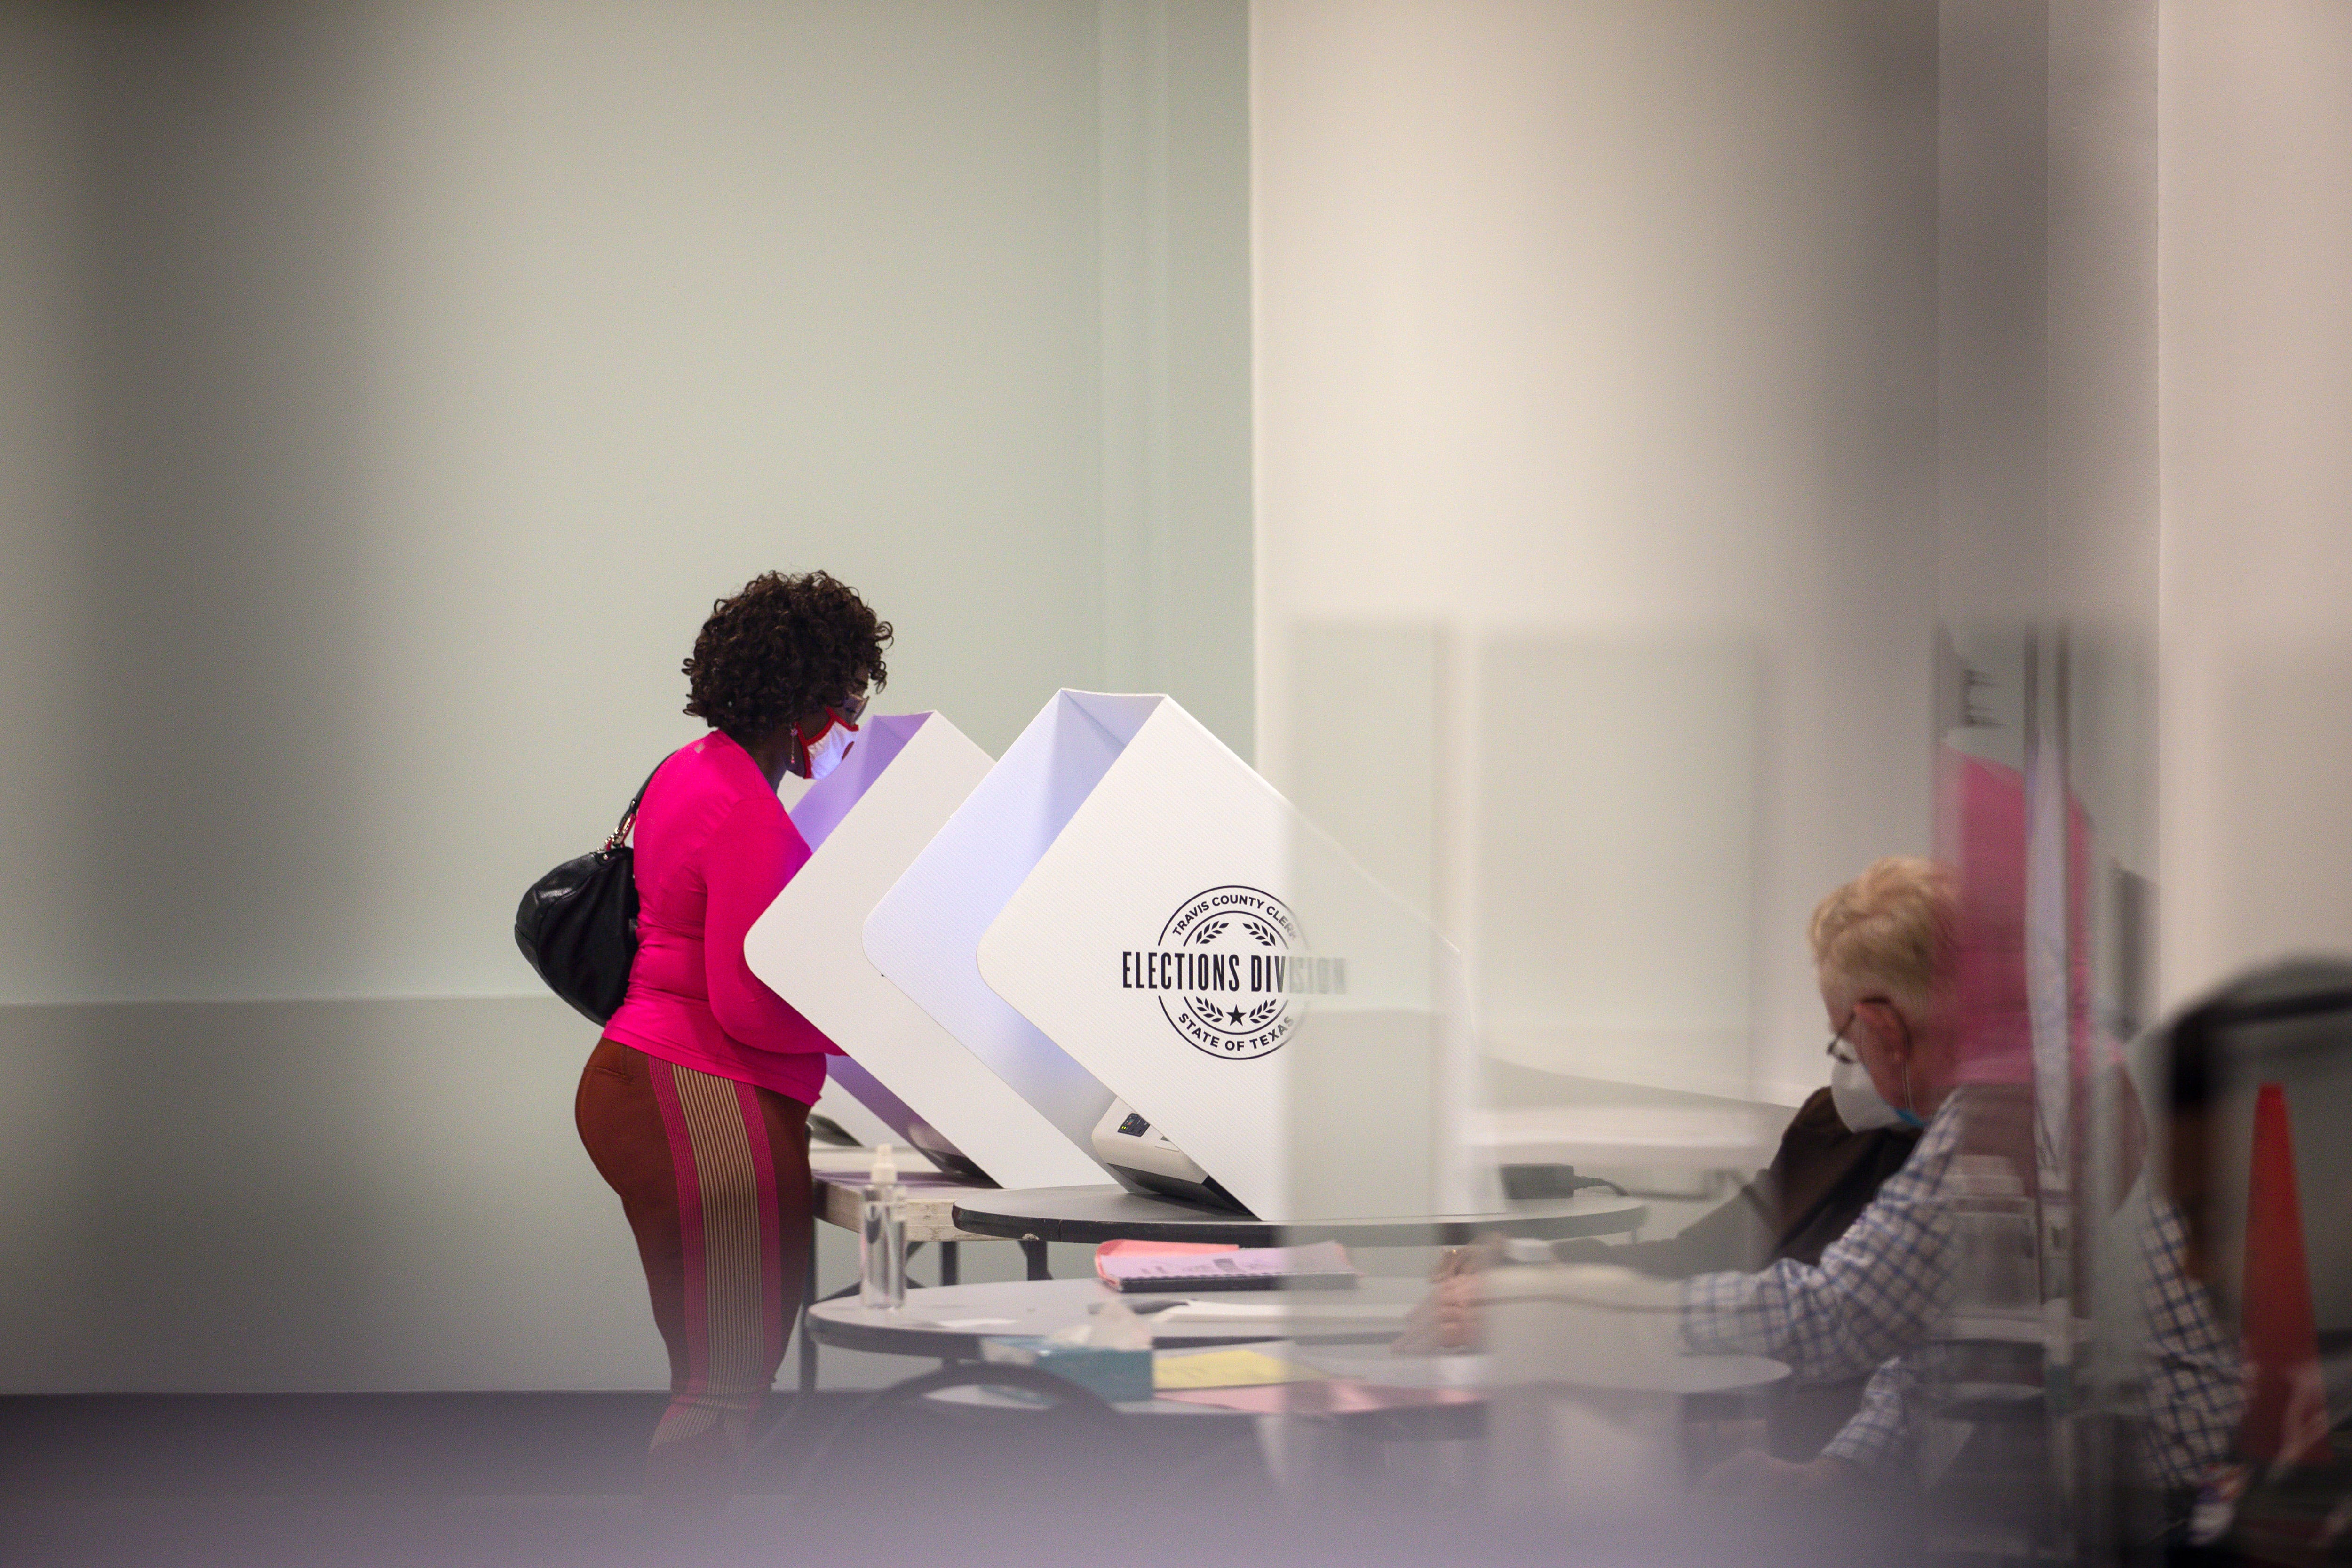 A woman in a pink blouse votes in a primary election as election workers sit behind glass partitions.